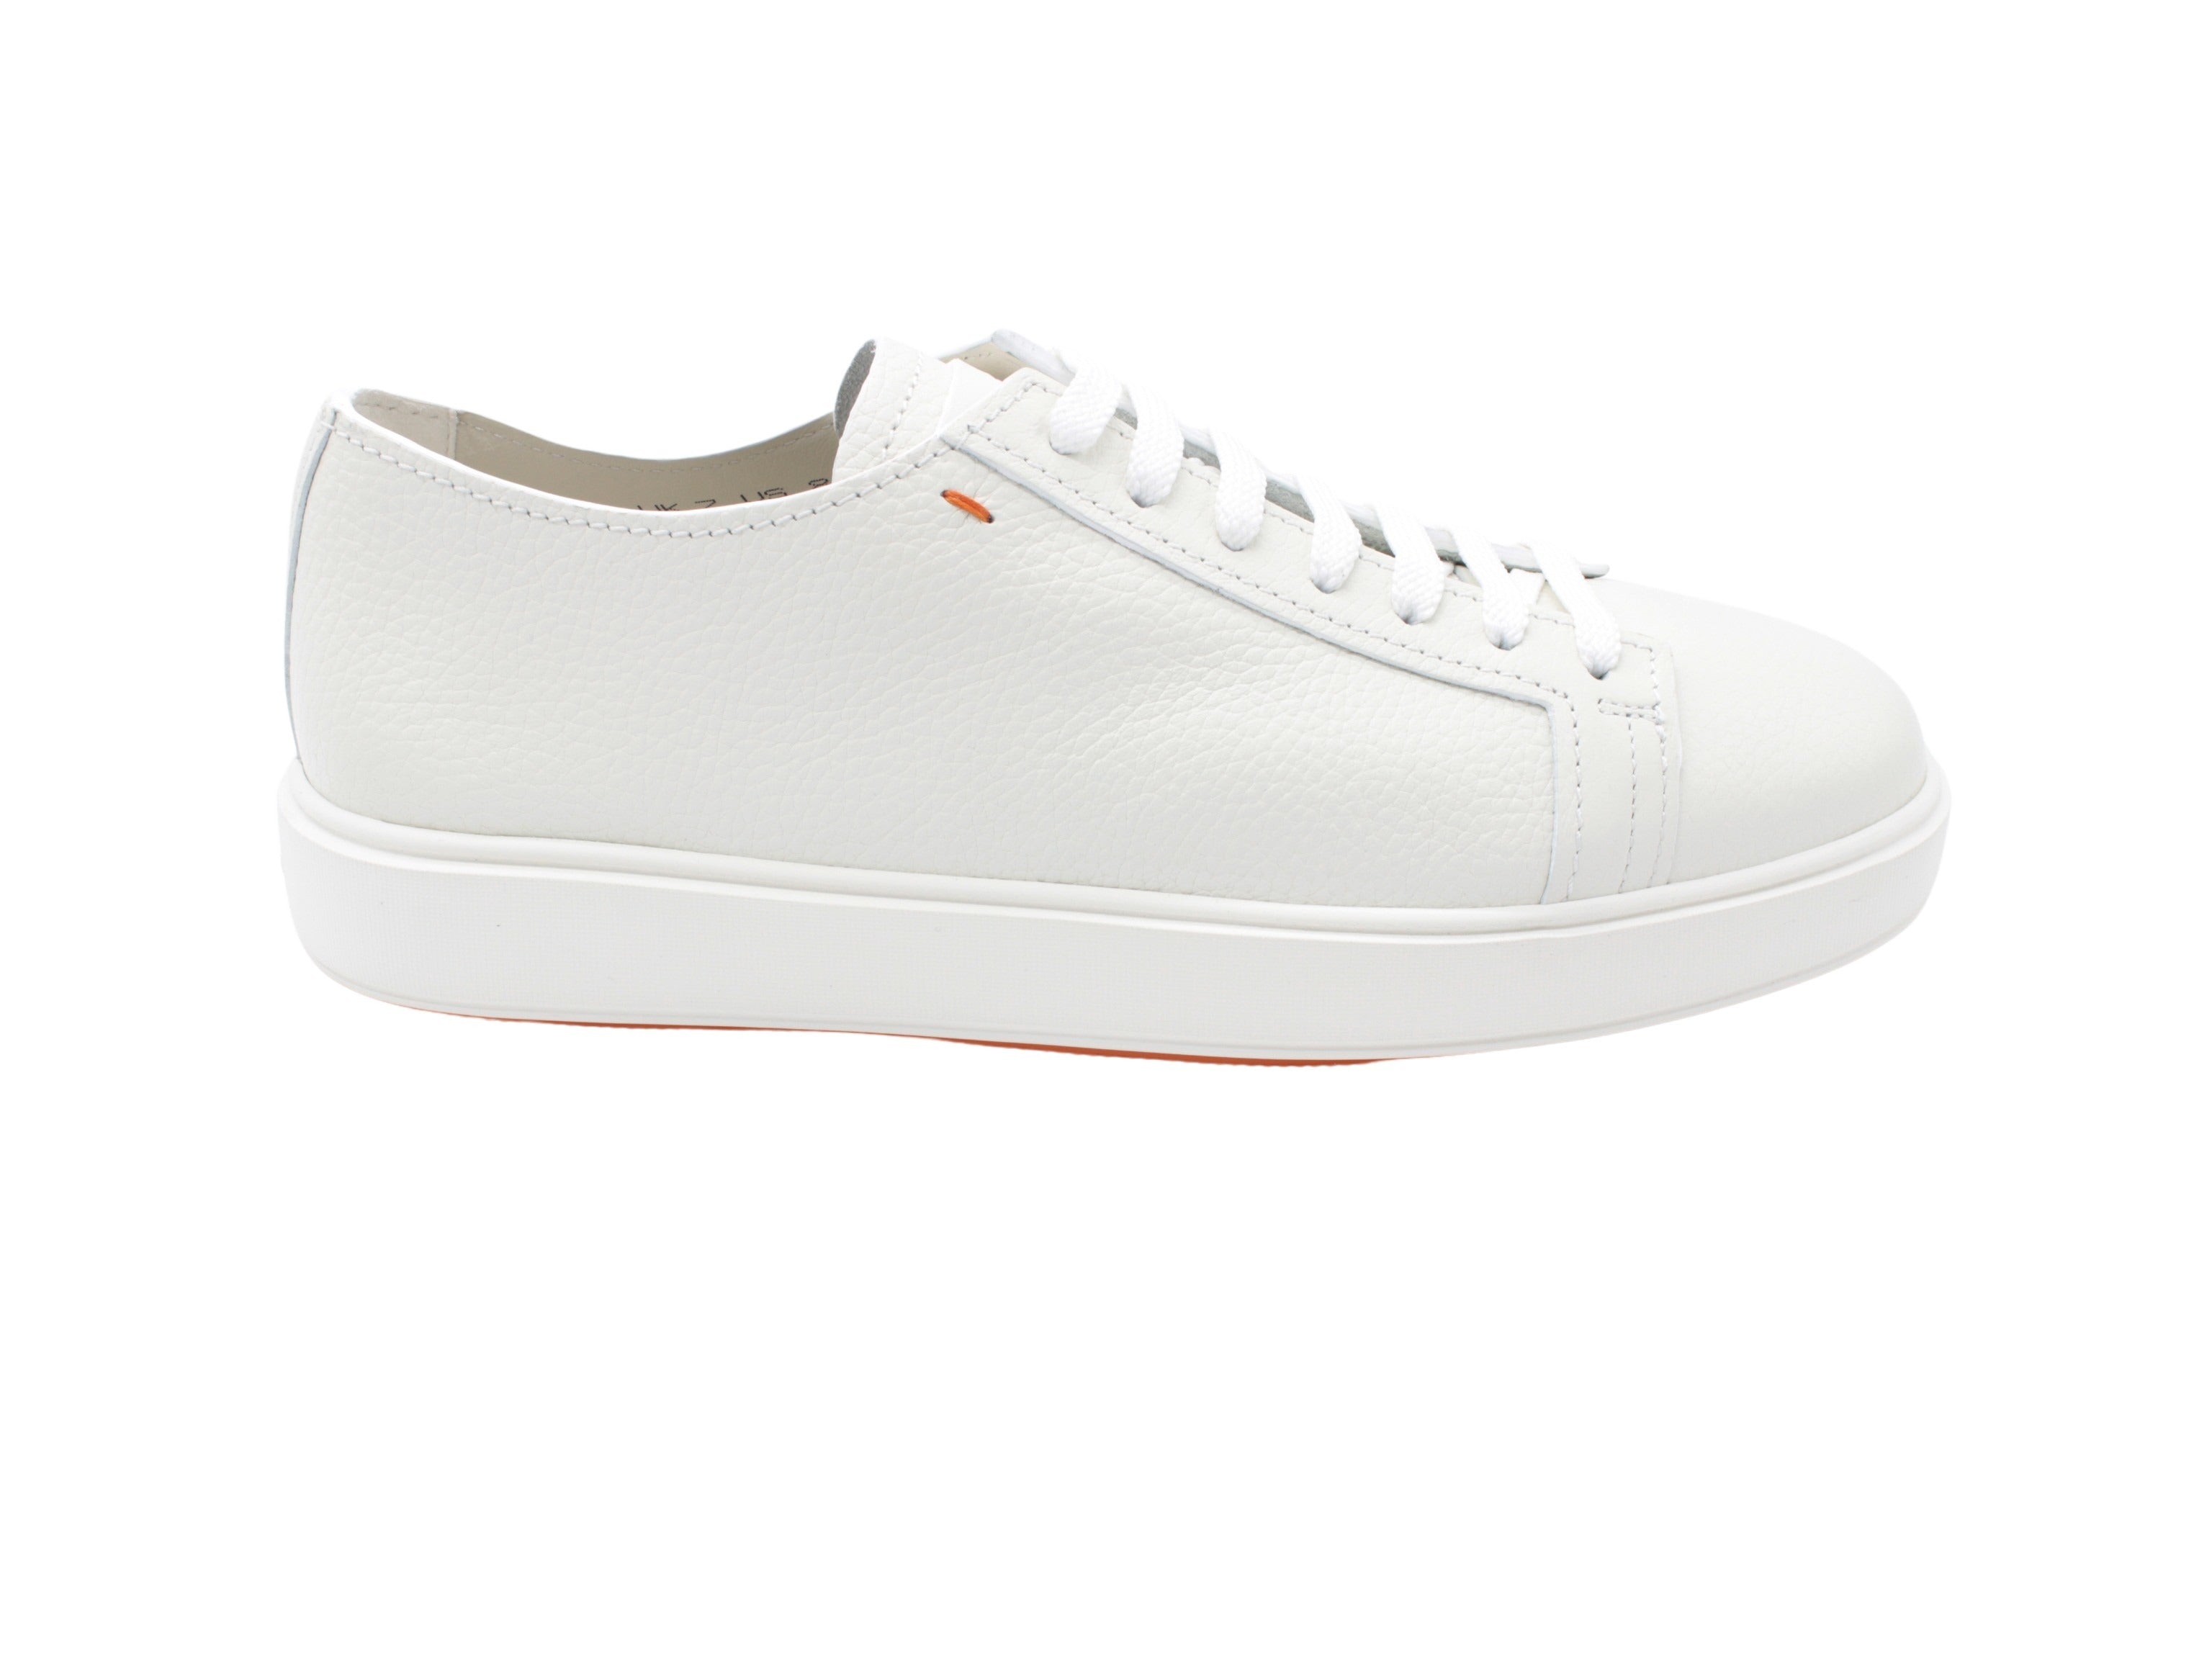 MBCD21430BARCMD white sneaker